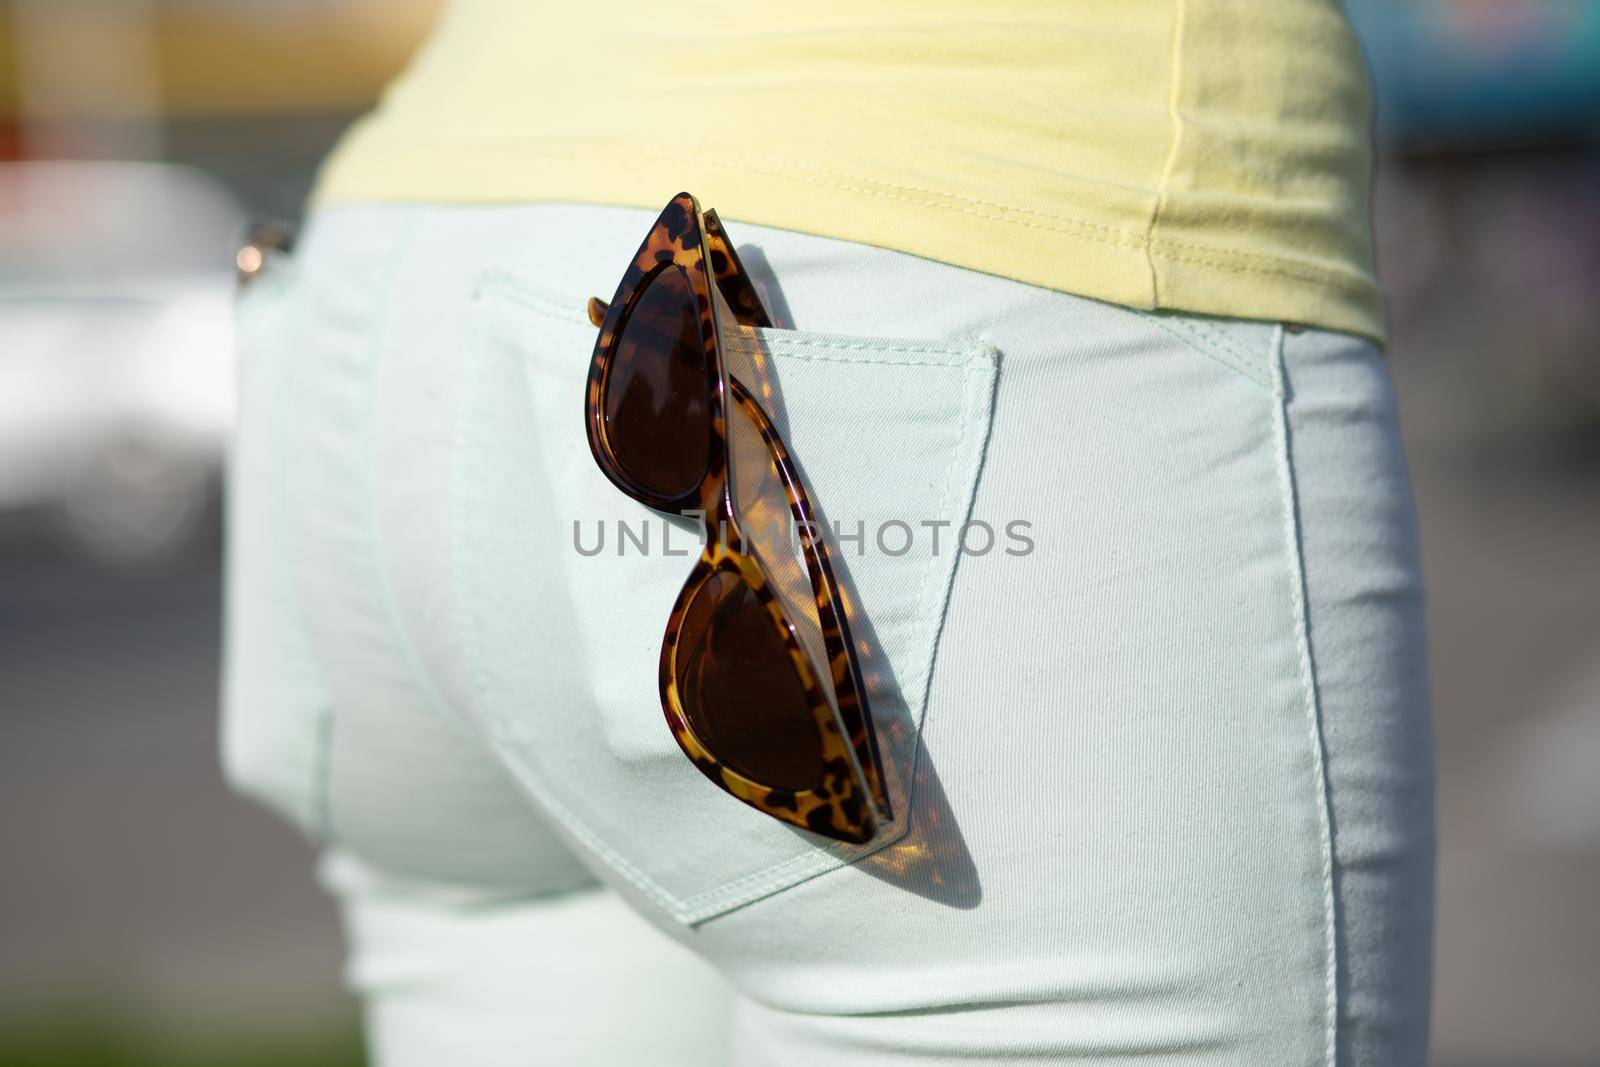 Fashionable Retro style Sunglasses in the back pocket of female jeans by adamr